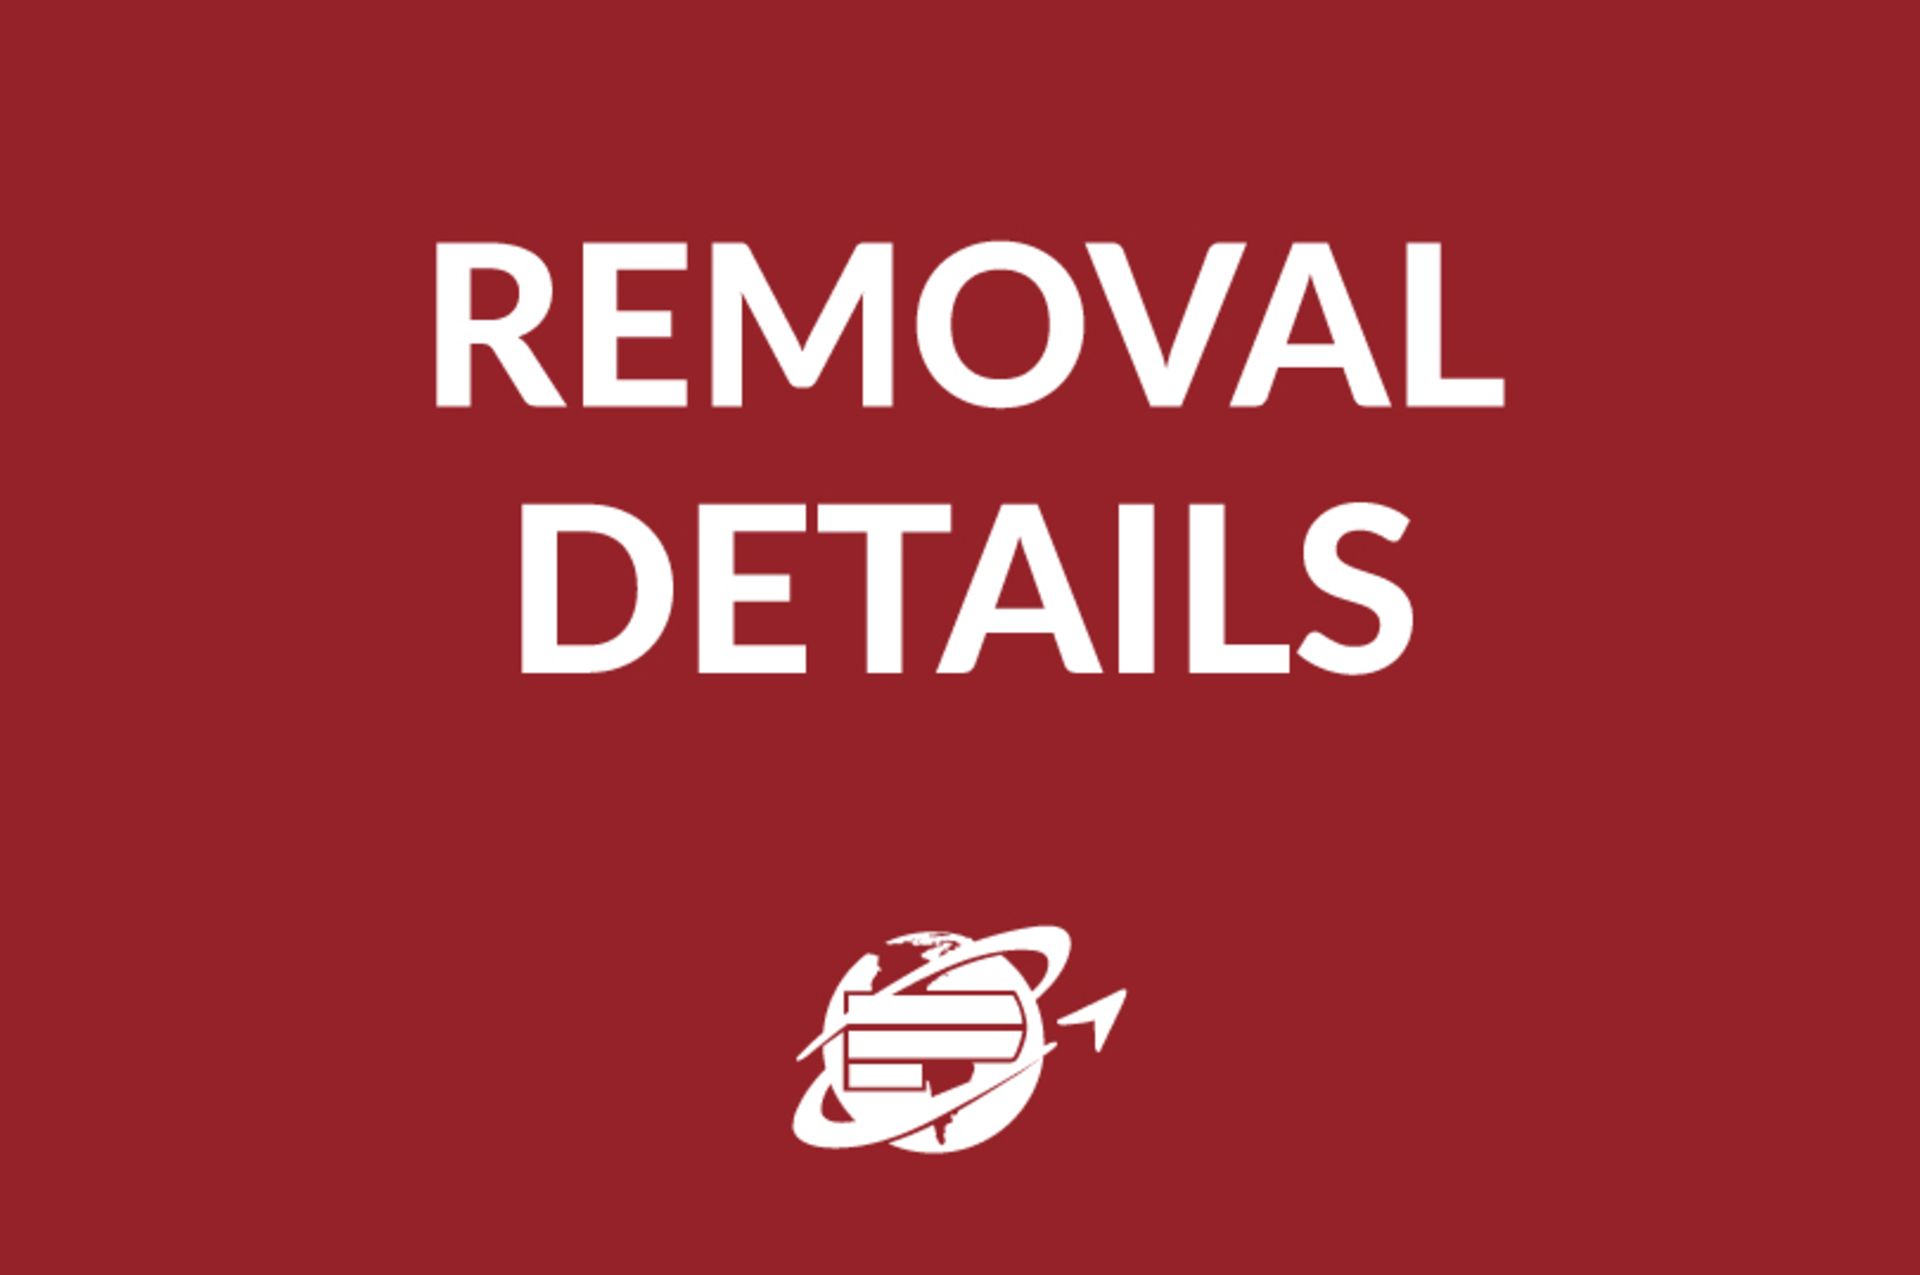 All items must be removed no later than Wednesday, January 31st. All removal is strictly on an appoi